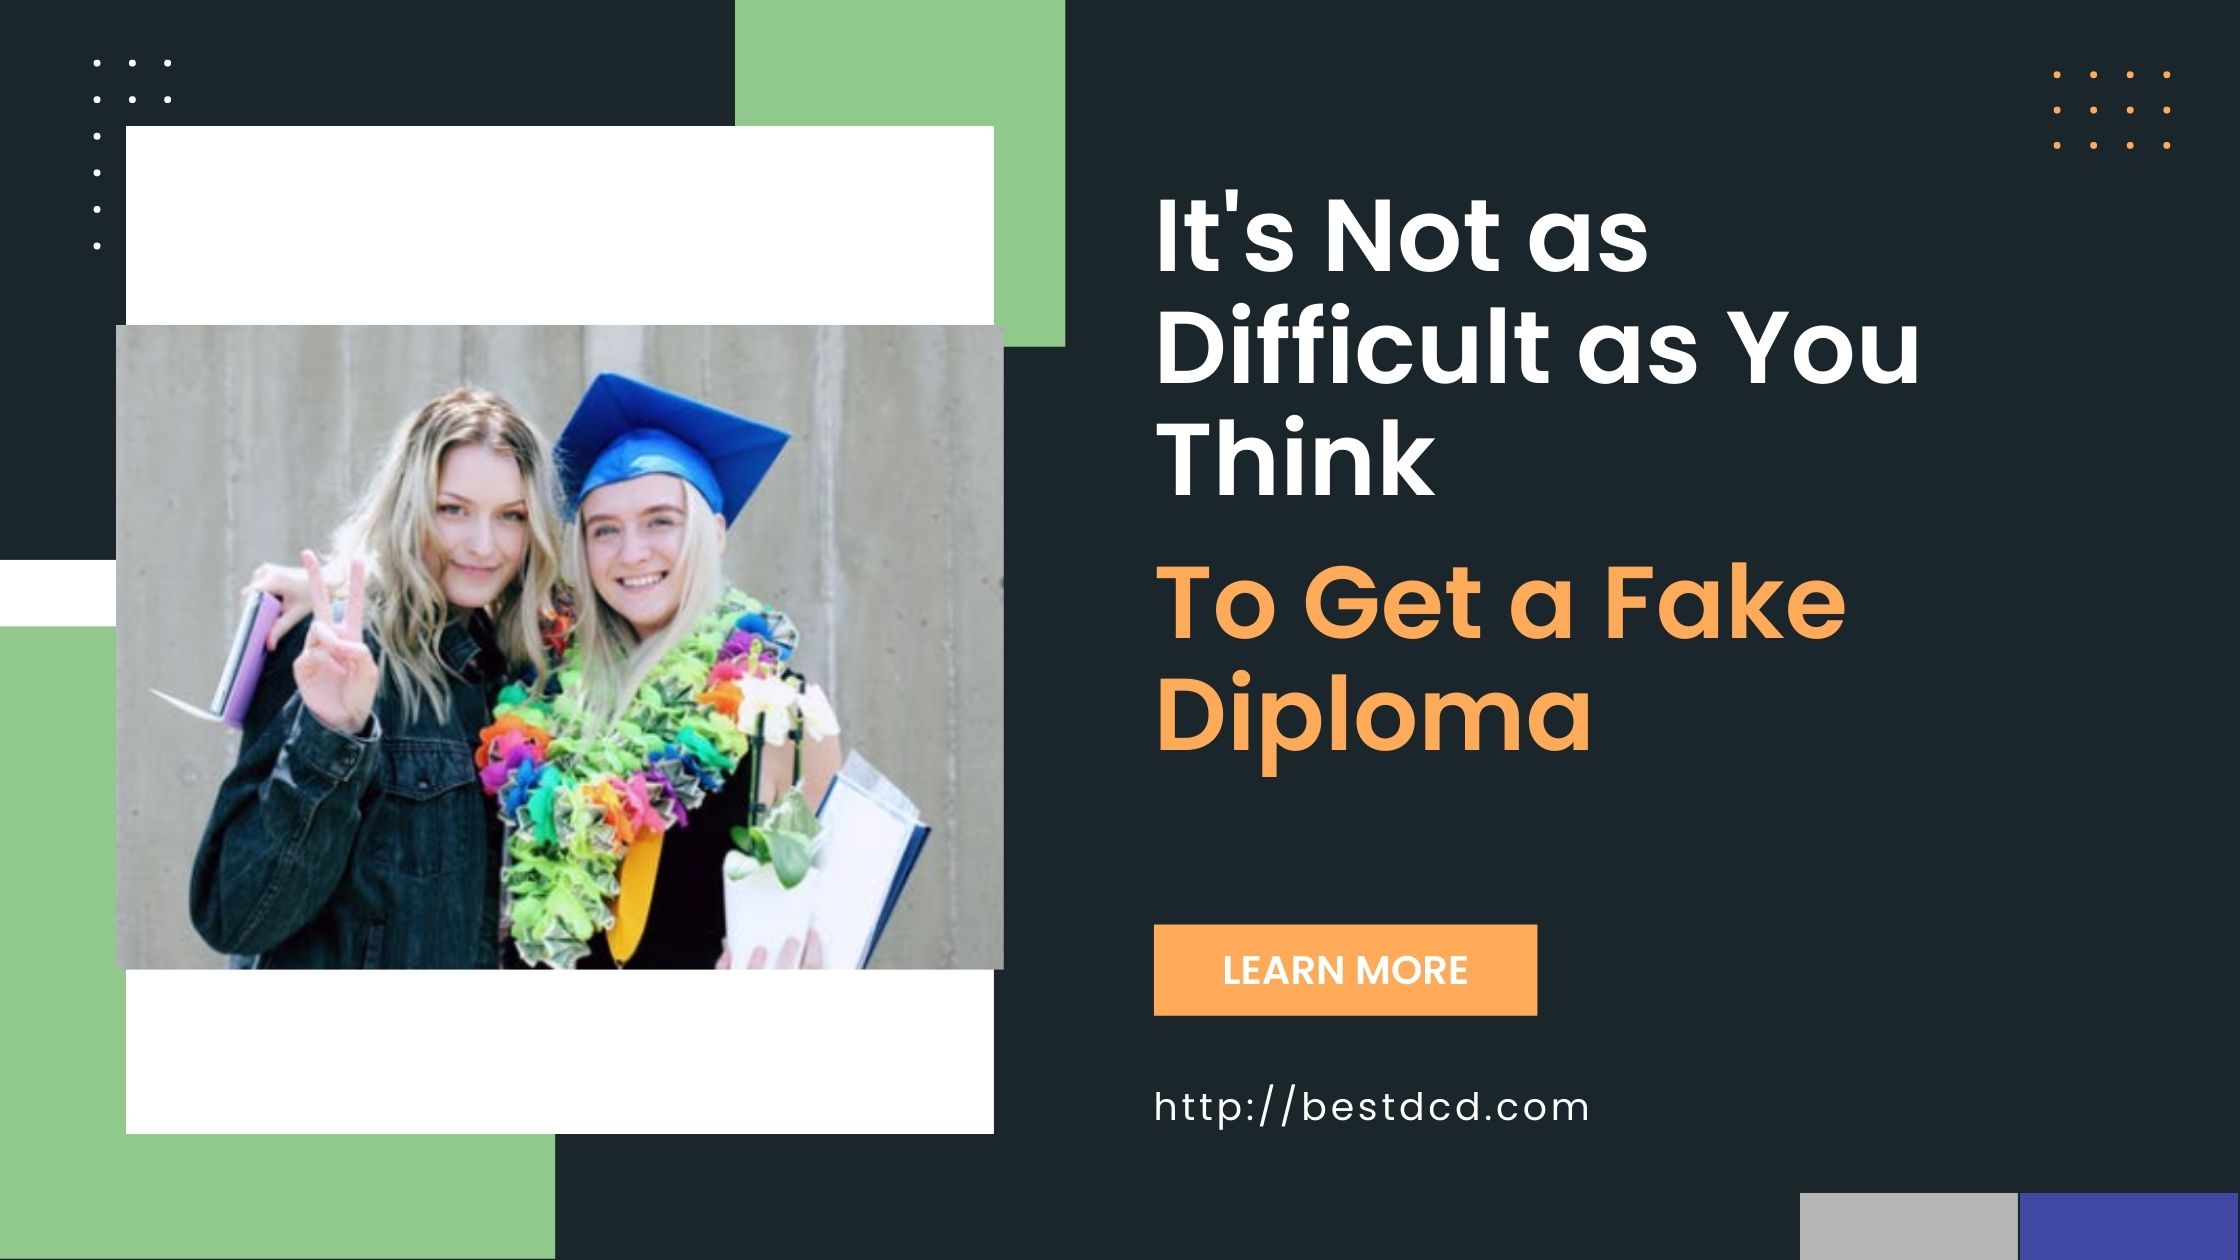 It's Not as Difficult as You Think to Get a Fake Diploma